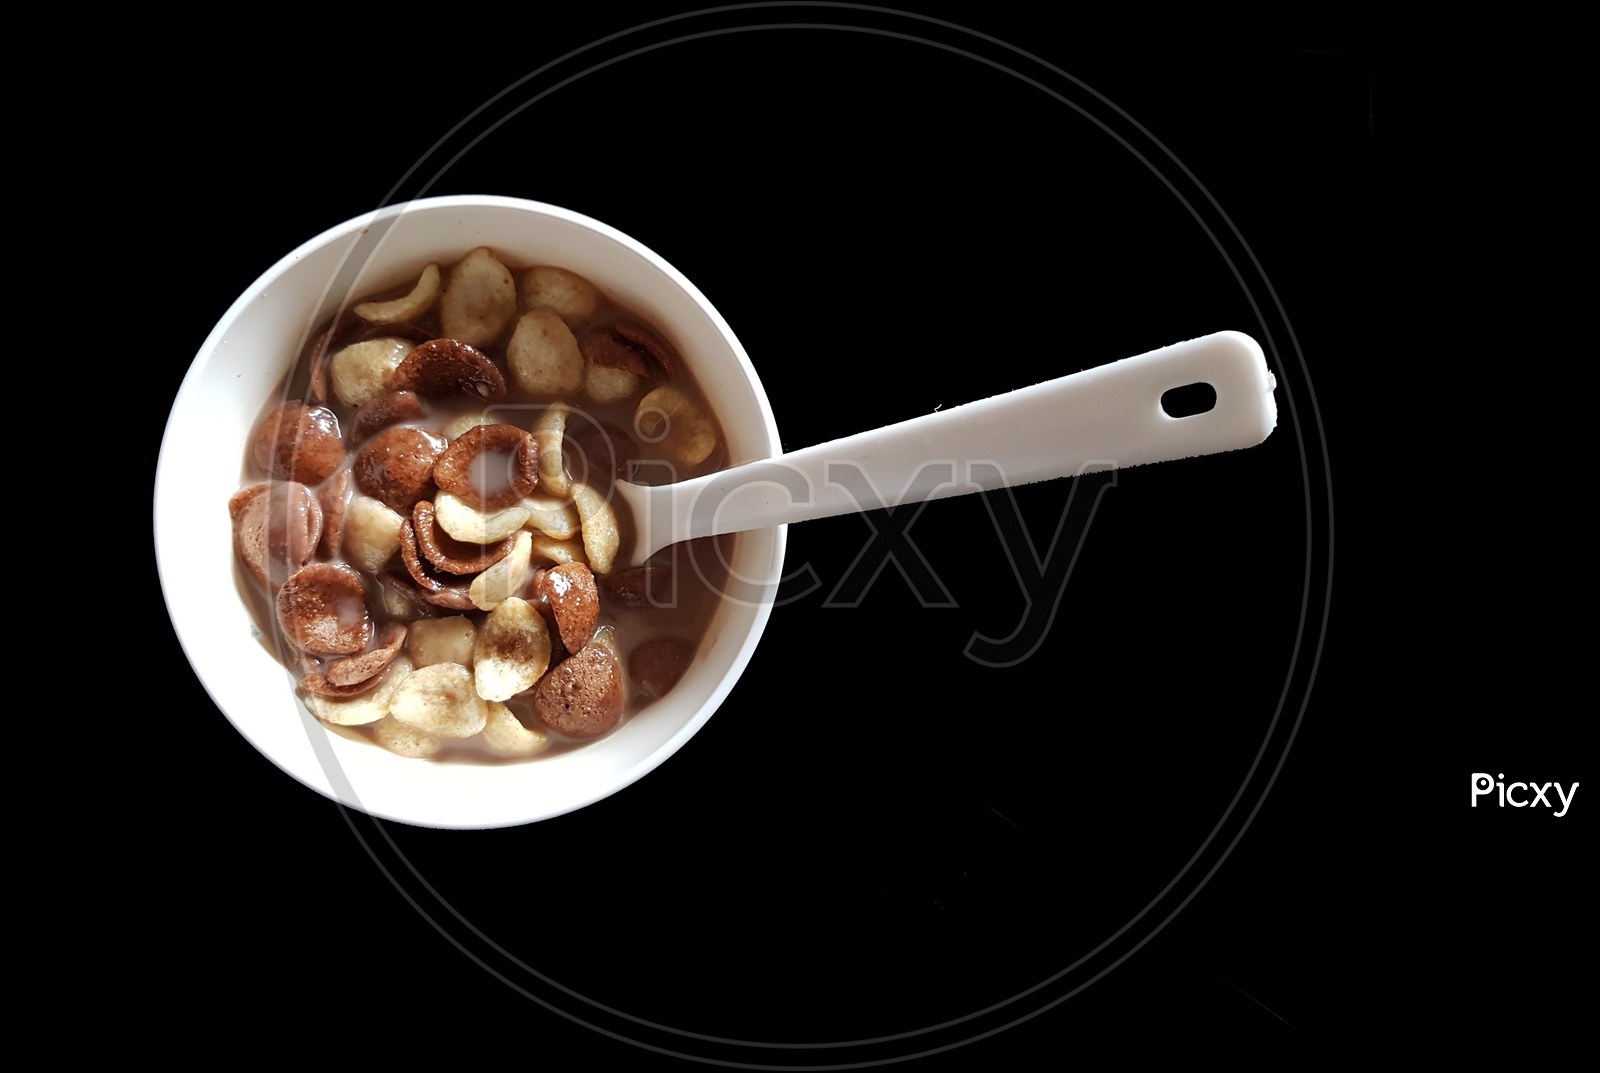 Vanilla And Chocolate Cornflakes Dipped In Chocolate Milk In A White Bowl With Spoon In Black Background